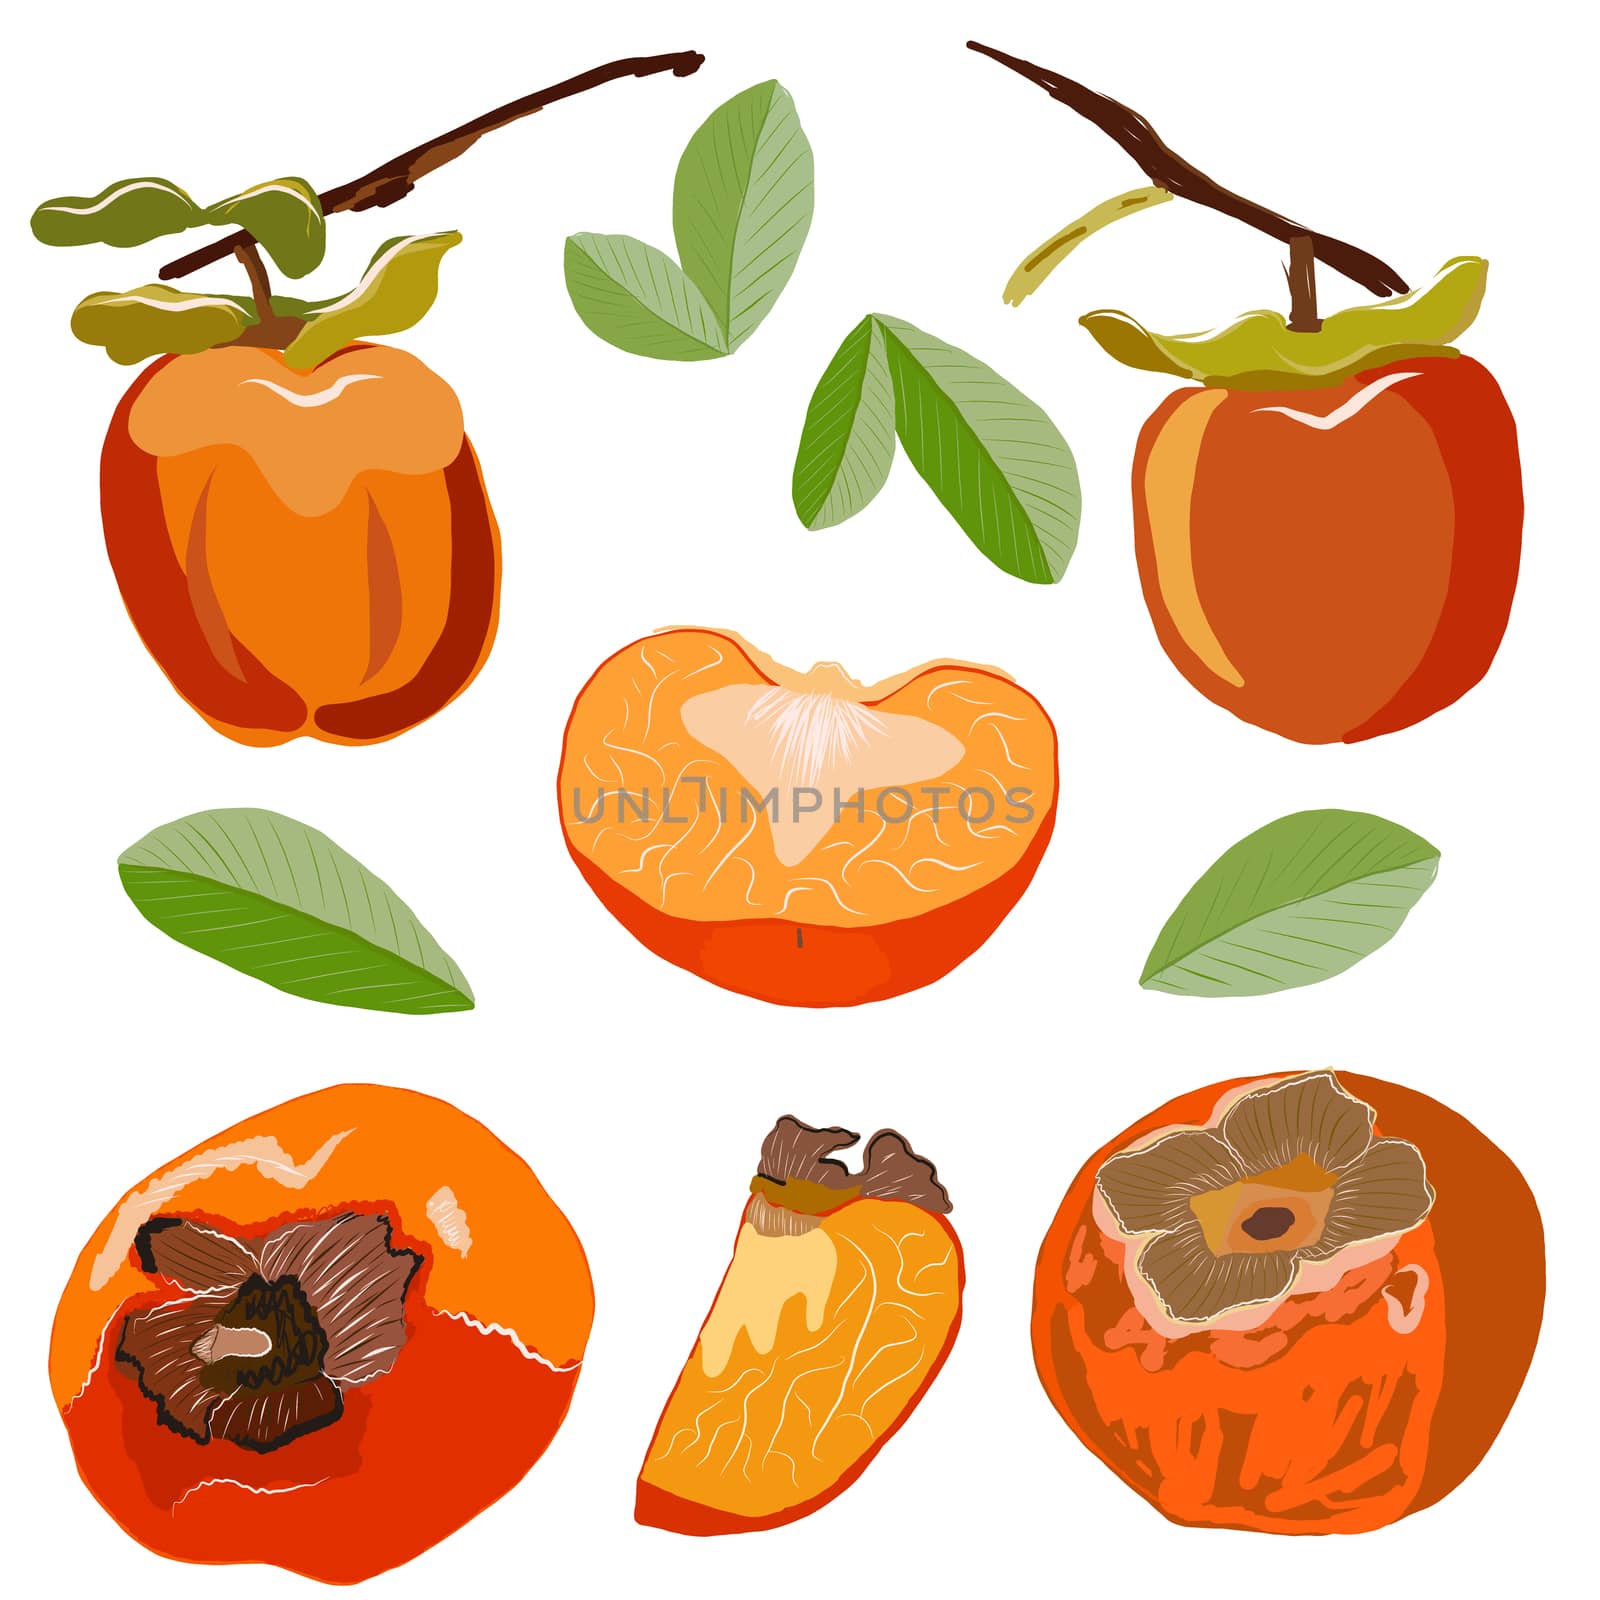 Persimmon set isolated on white background. Whole and sliced sharon fruit vector illustration. by Nata_Prando